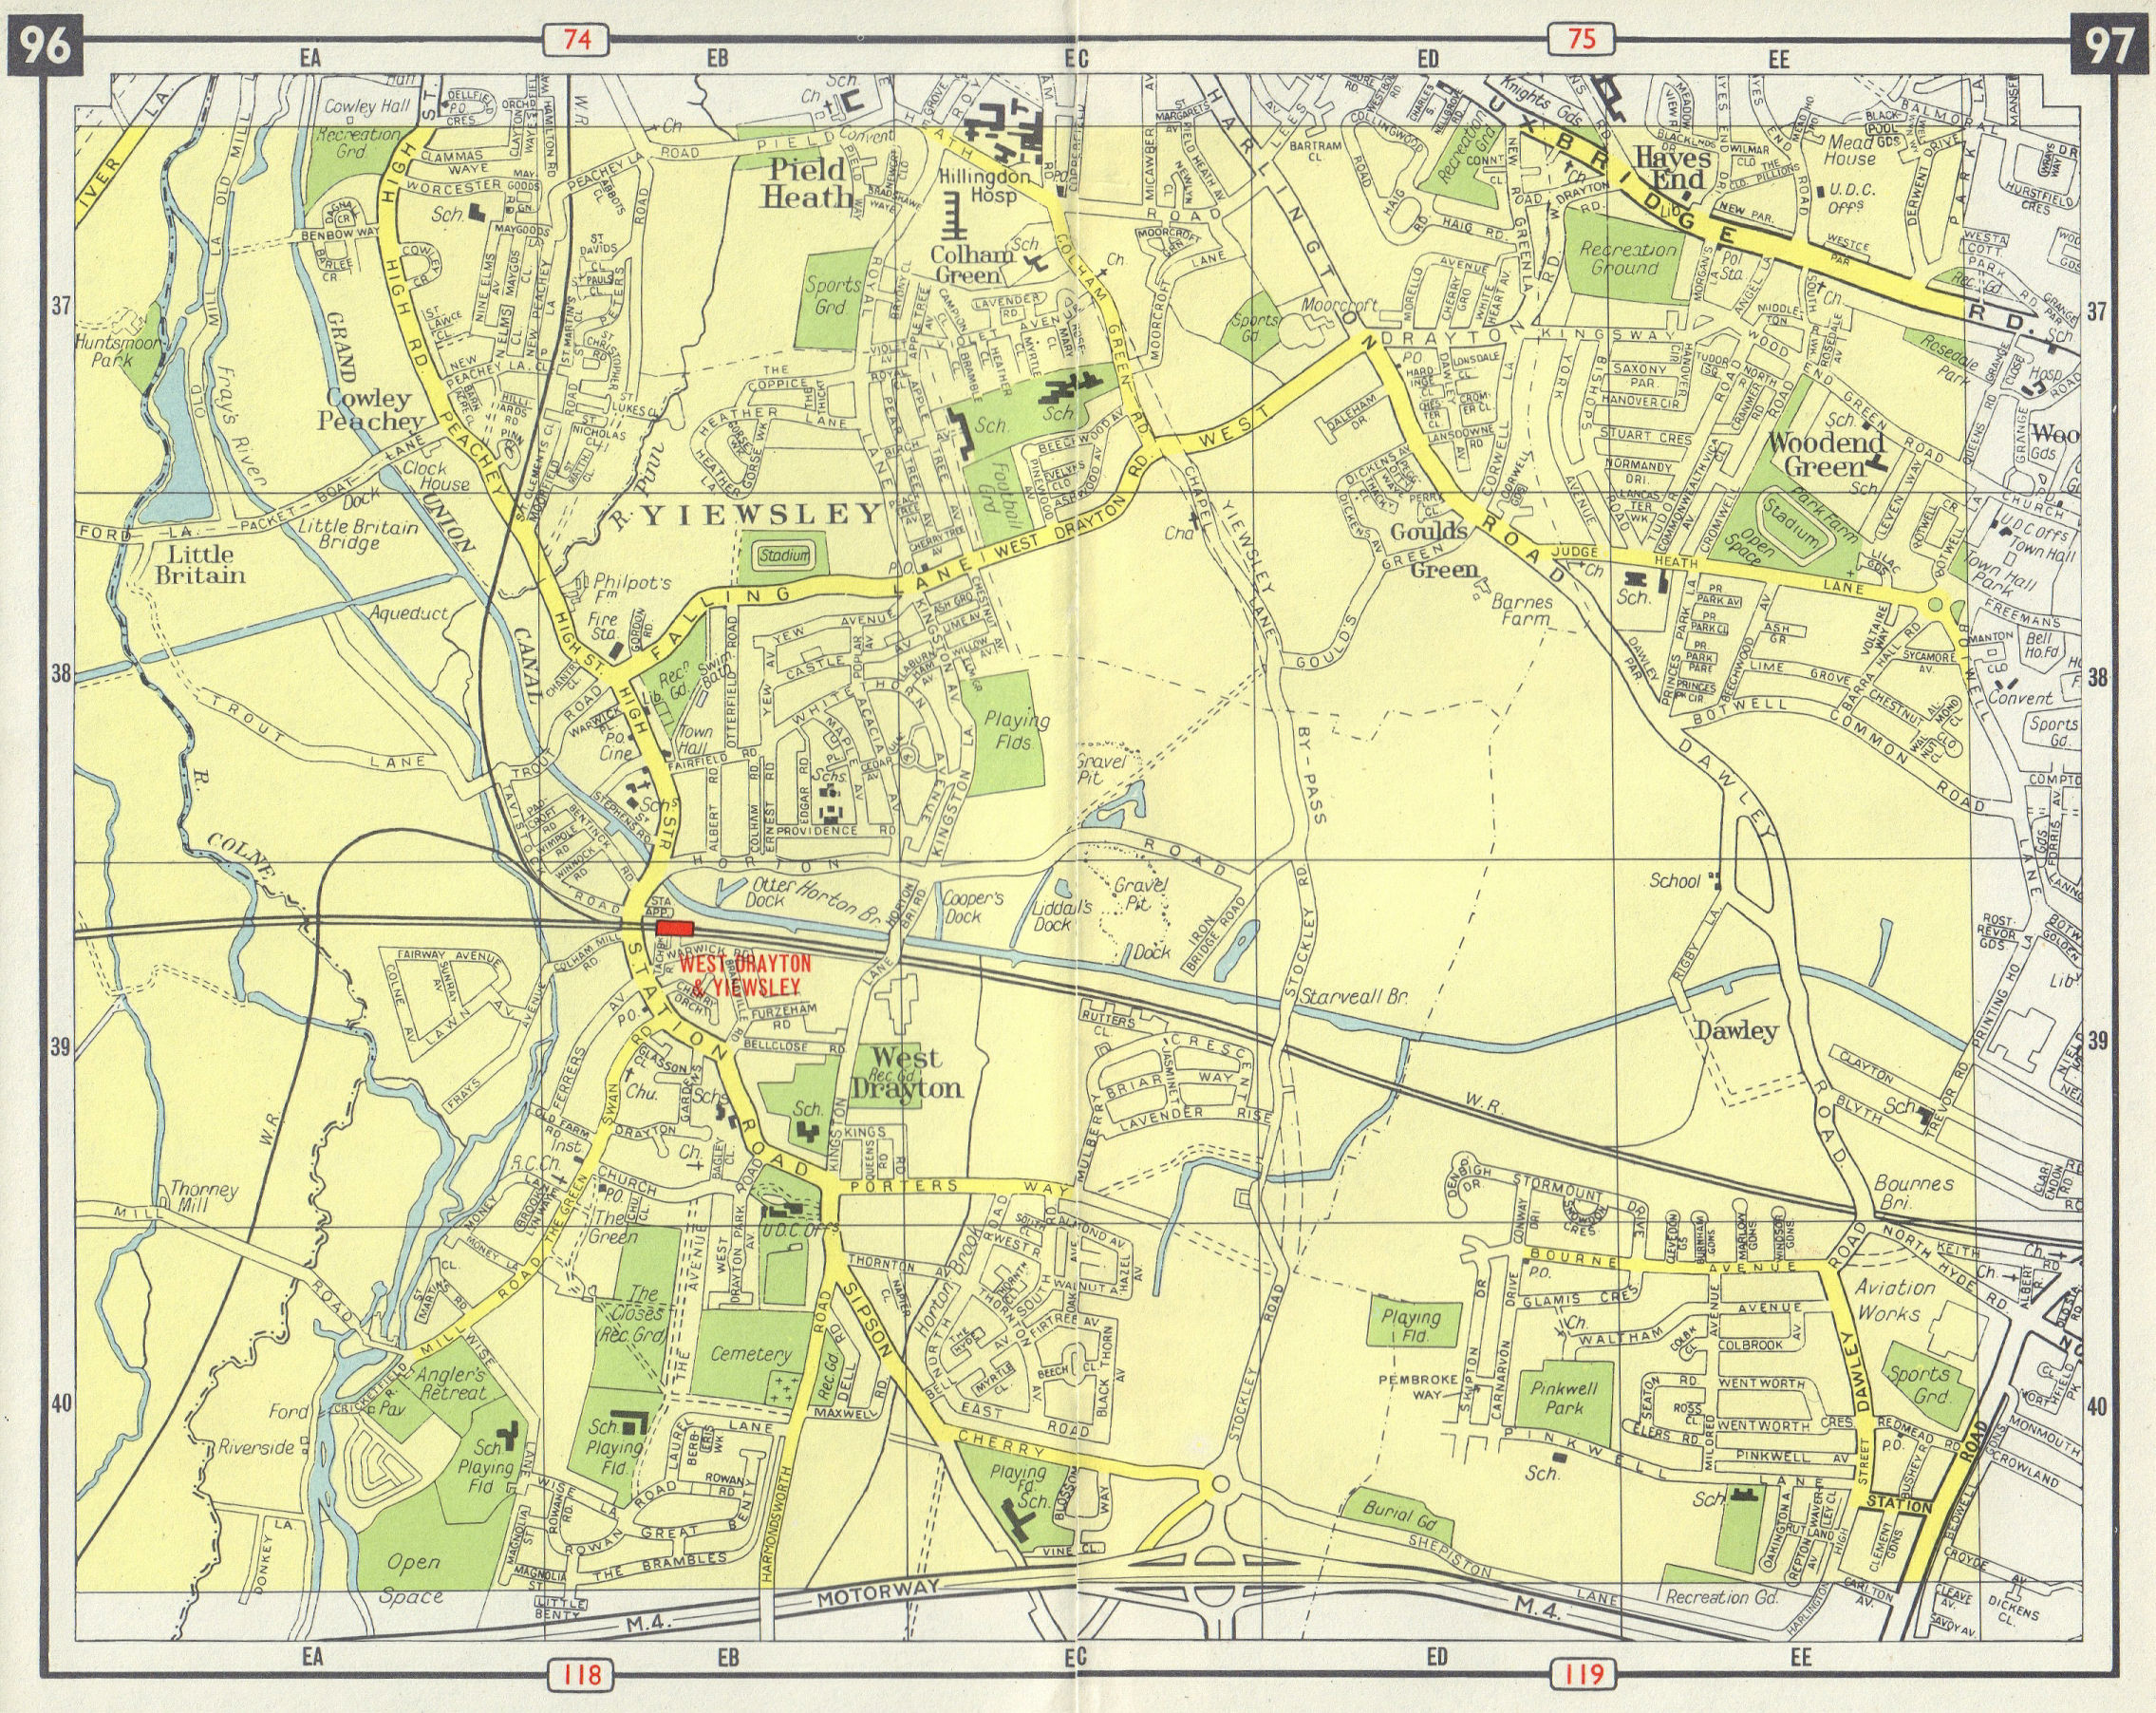 Associate Product W LONDON West Drayton Yiewsley Hayes Pied Heath Woodend/Goulds Green 1965 map